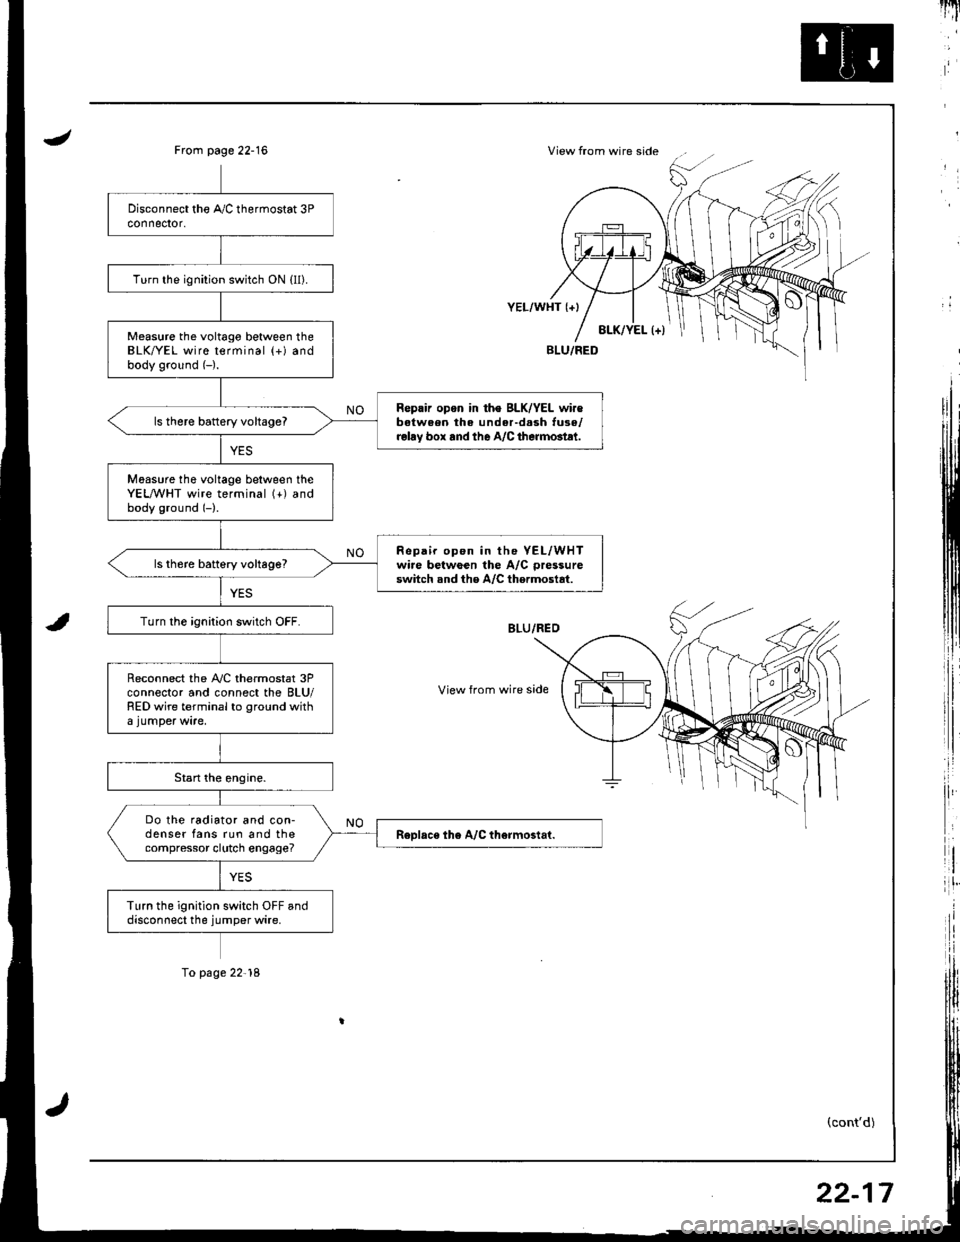 HONDA INTEGRA 1998 4.G Repair Manual JView from wire sideFrom page 22-16
i,:,
il
rlt
8LK/YEL l+)
YEL/WHT {+}
View from wire side
BLU/FED
(contd)
Turn the ignition switch ON {ll).
Measure the voltago between theBLK/YEL wire terminal (+)